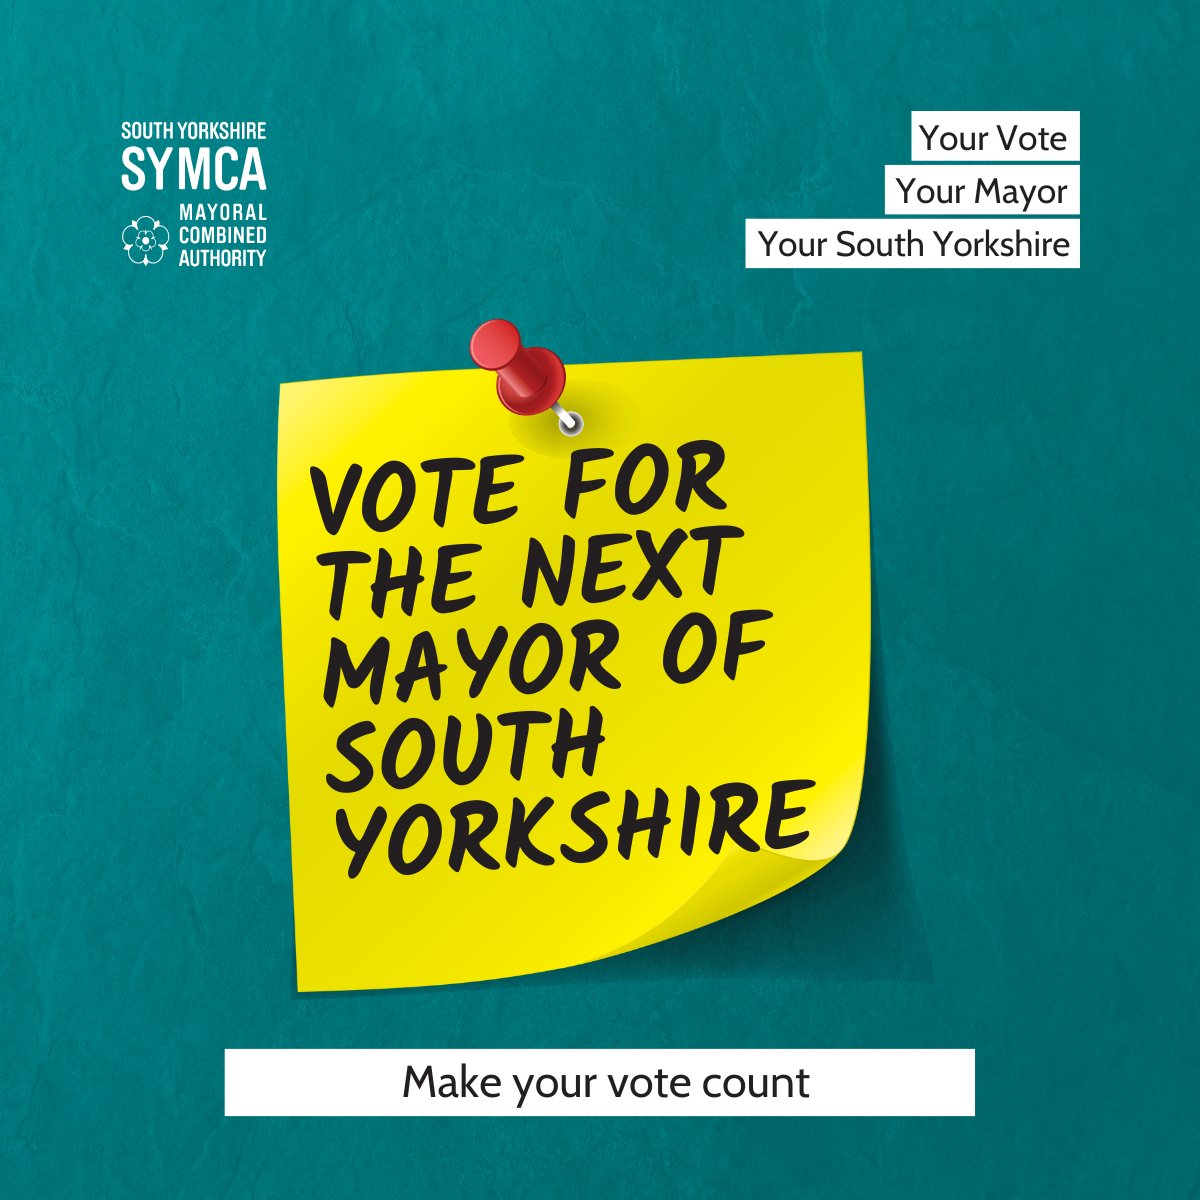 Are you registered to vote on 2 May? The next Mayor will chair the South Yorkshire Mayoral Combined Authority, bringing together the local councils of Barnsley, Doncaster, Rotherham and Sheffield. Find out more: orlo.uk/DSddt #syelects